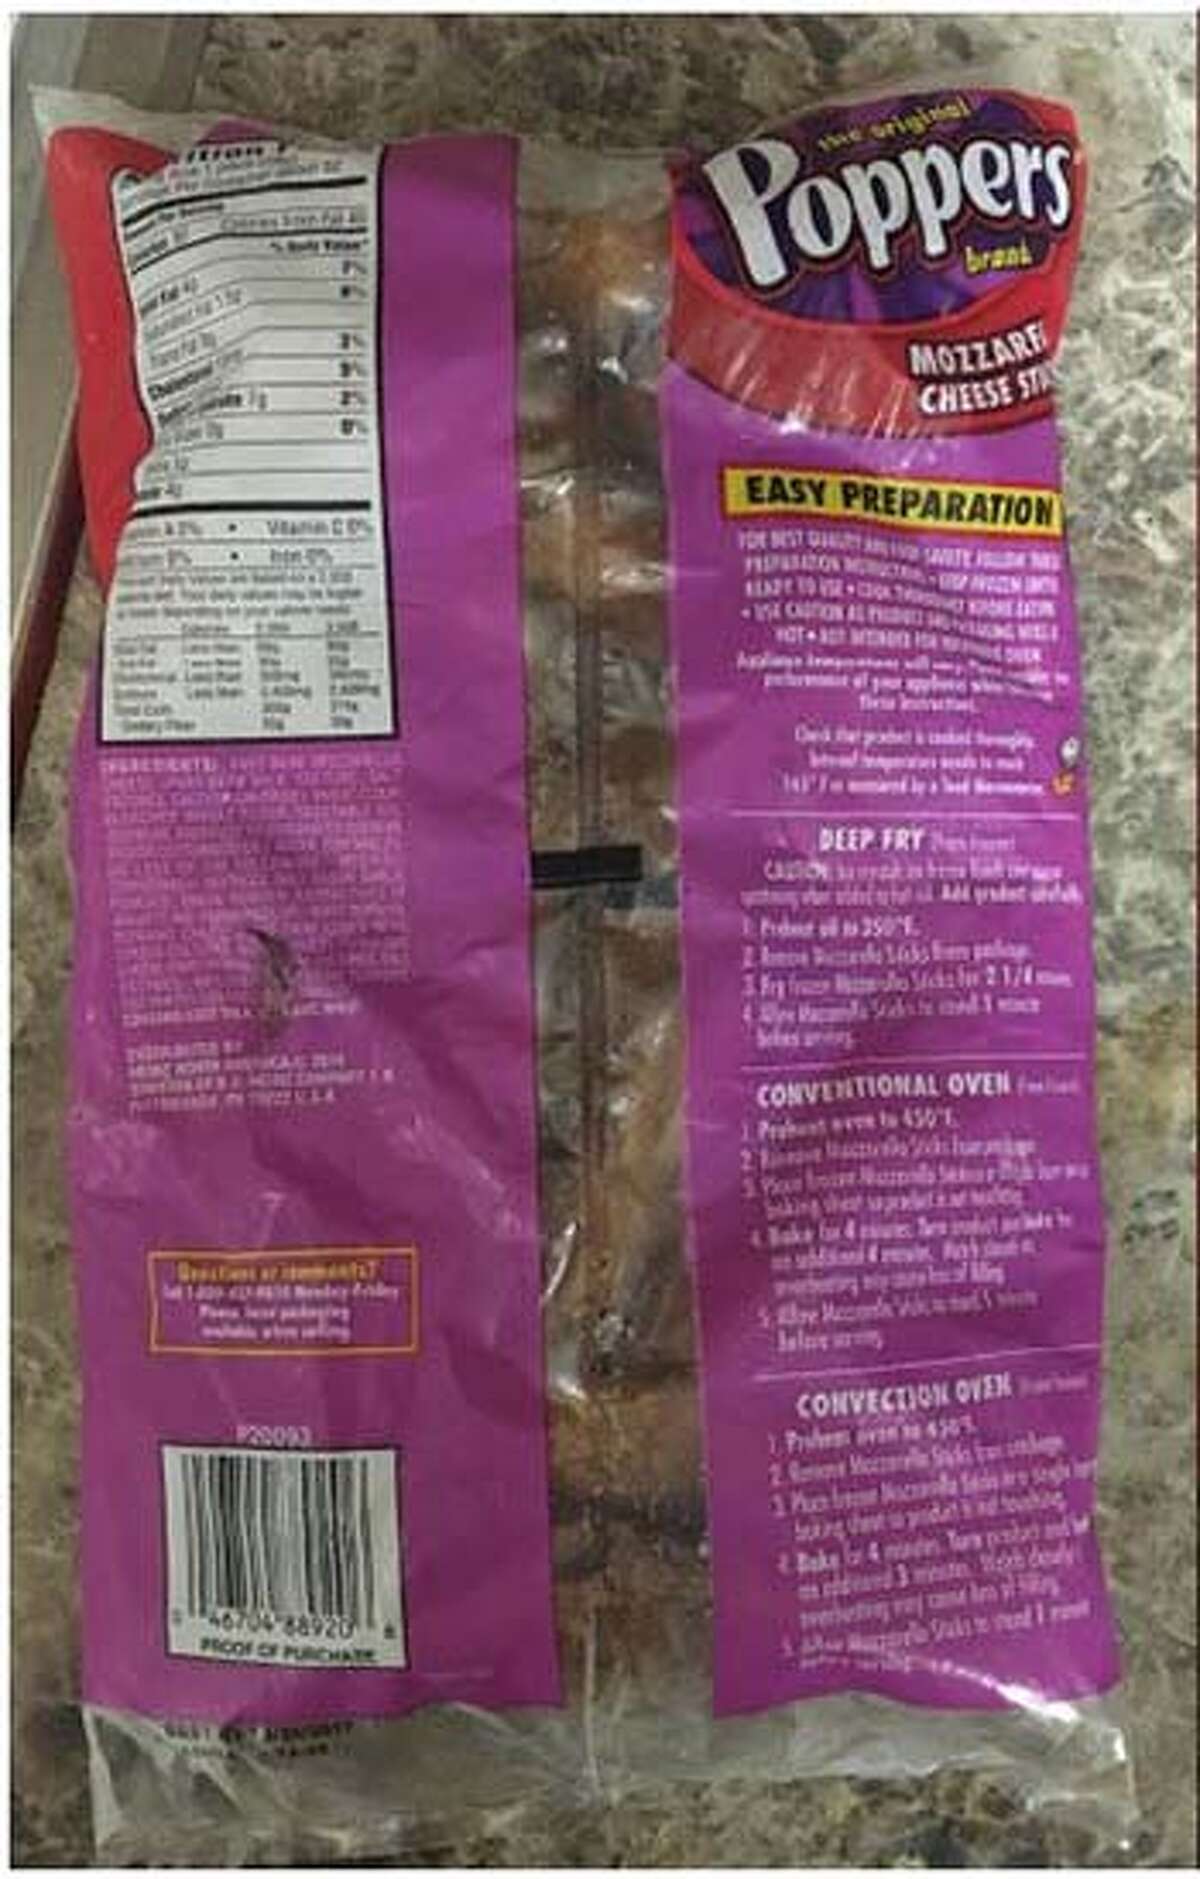 Monogram Appetizers of Plover, Wis. is recalling approximately 5,000 cases of Poppers Brand Mozzarella Cheese Sticks, because they may contain undeclared egg. Photo courtesy of the Food and Drug Administration